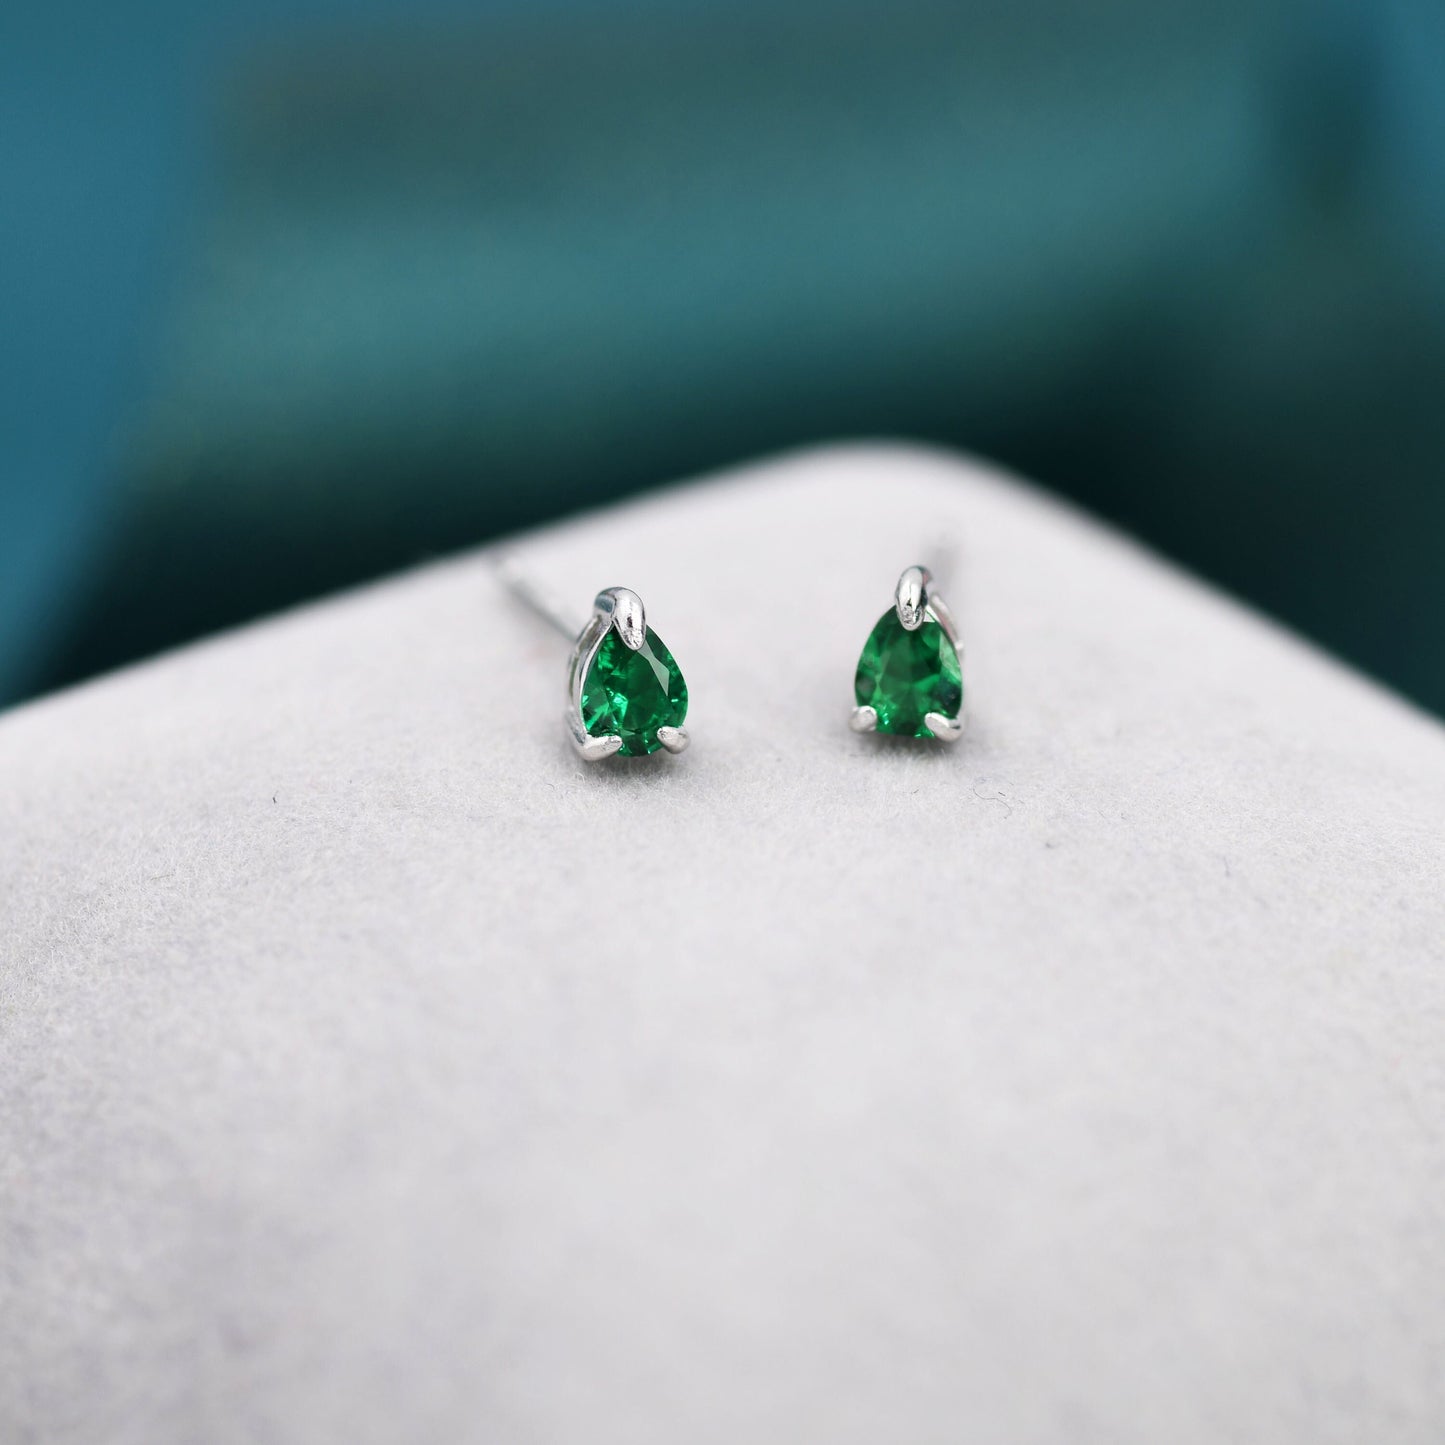 Extra Tiny Emerald Green Droplet CZ Stud Earrings in Sterling Silver, Tiny Pear Cut CZ Stud Earrings, Silver or Gold, May Birthstone